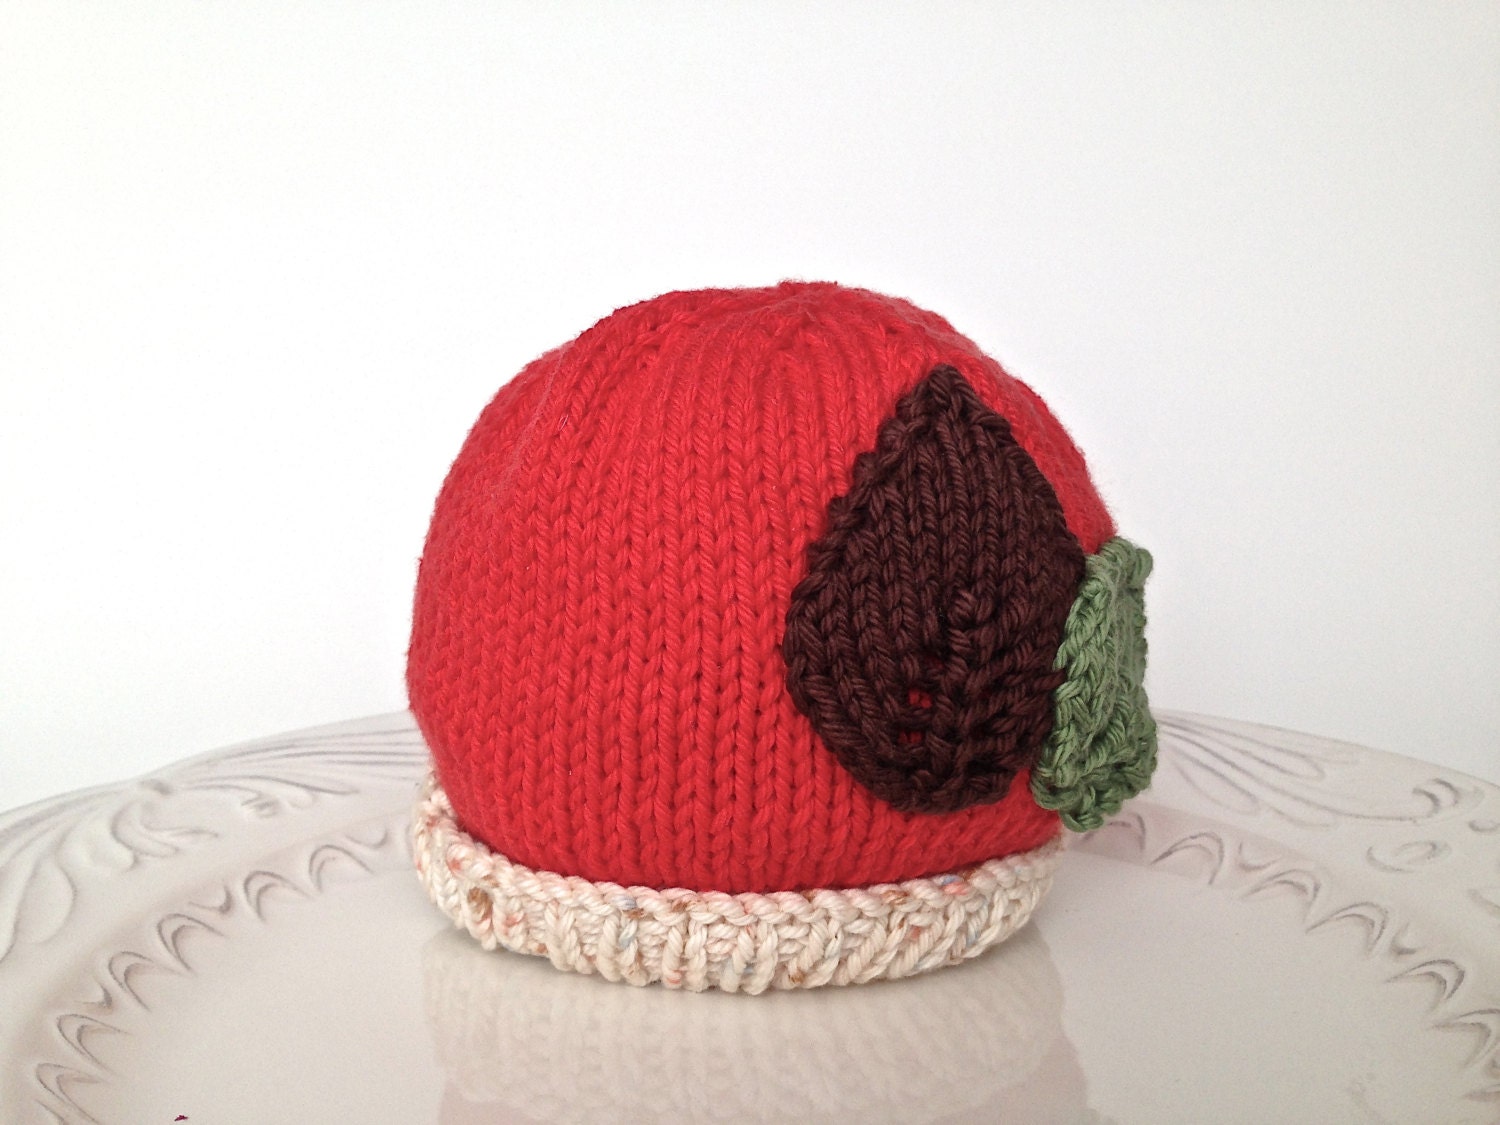 Hat for baby 0-3 months- hand knitted, 100% cotton - TinyLoveGifts